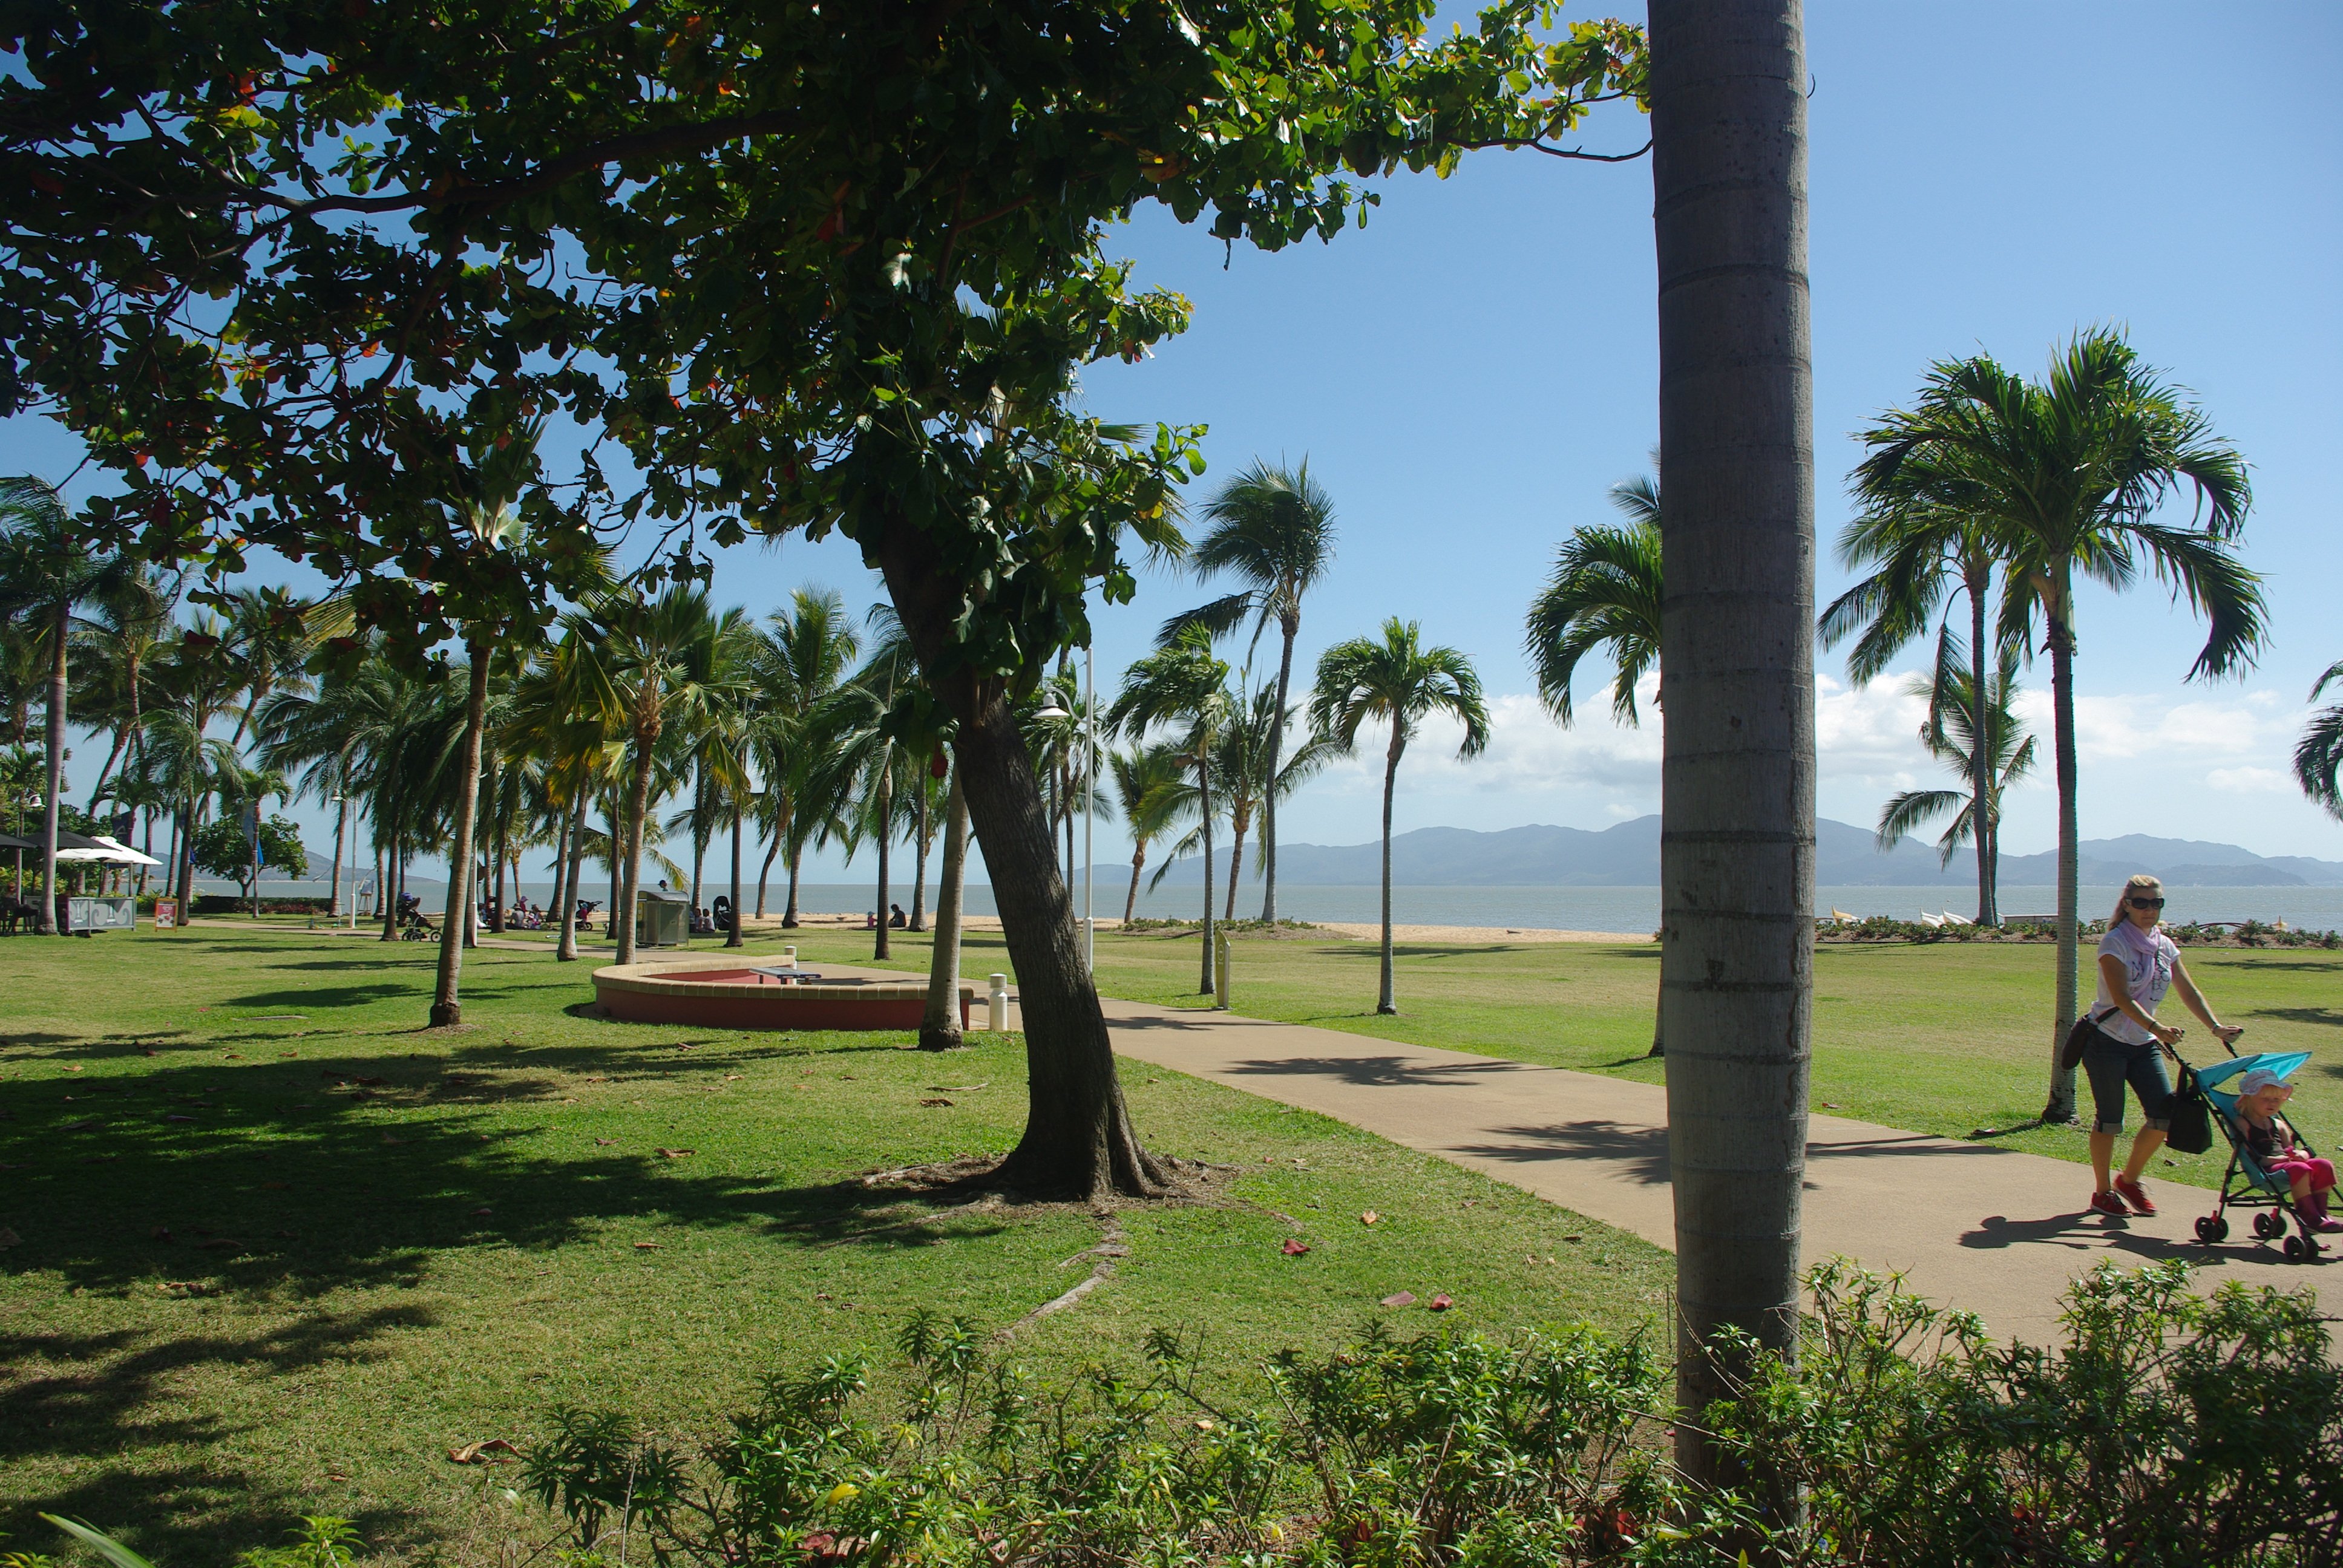 The 2.2 km long Strand Townsville with palm trees green grass and wide walkway is one of the best things to do in Townsville